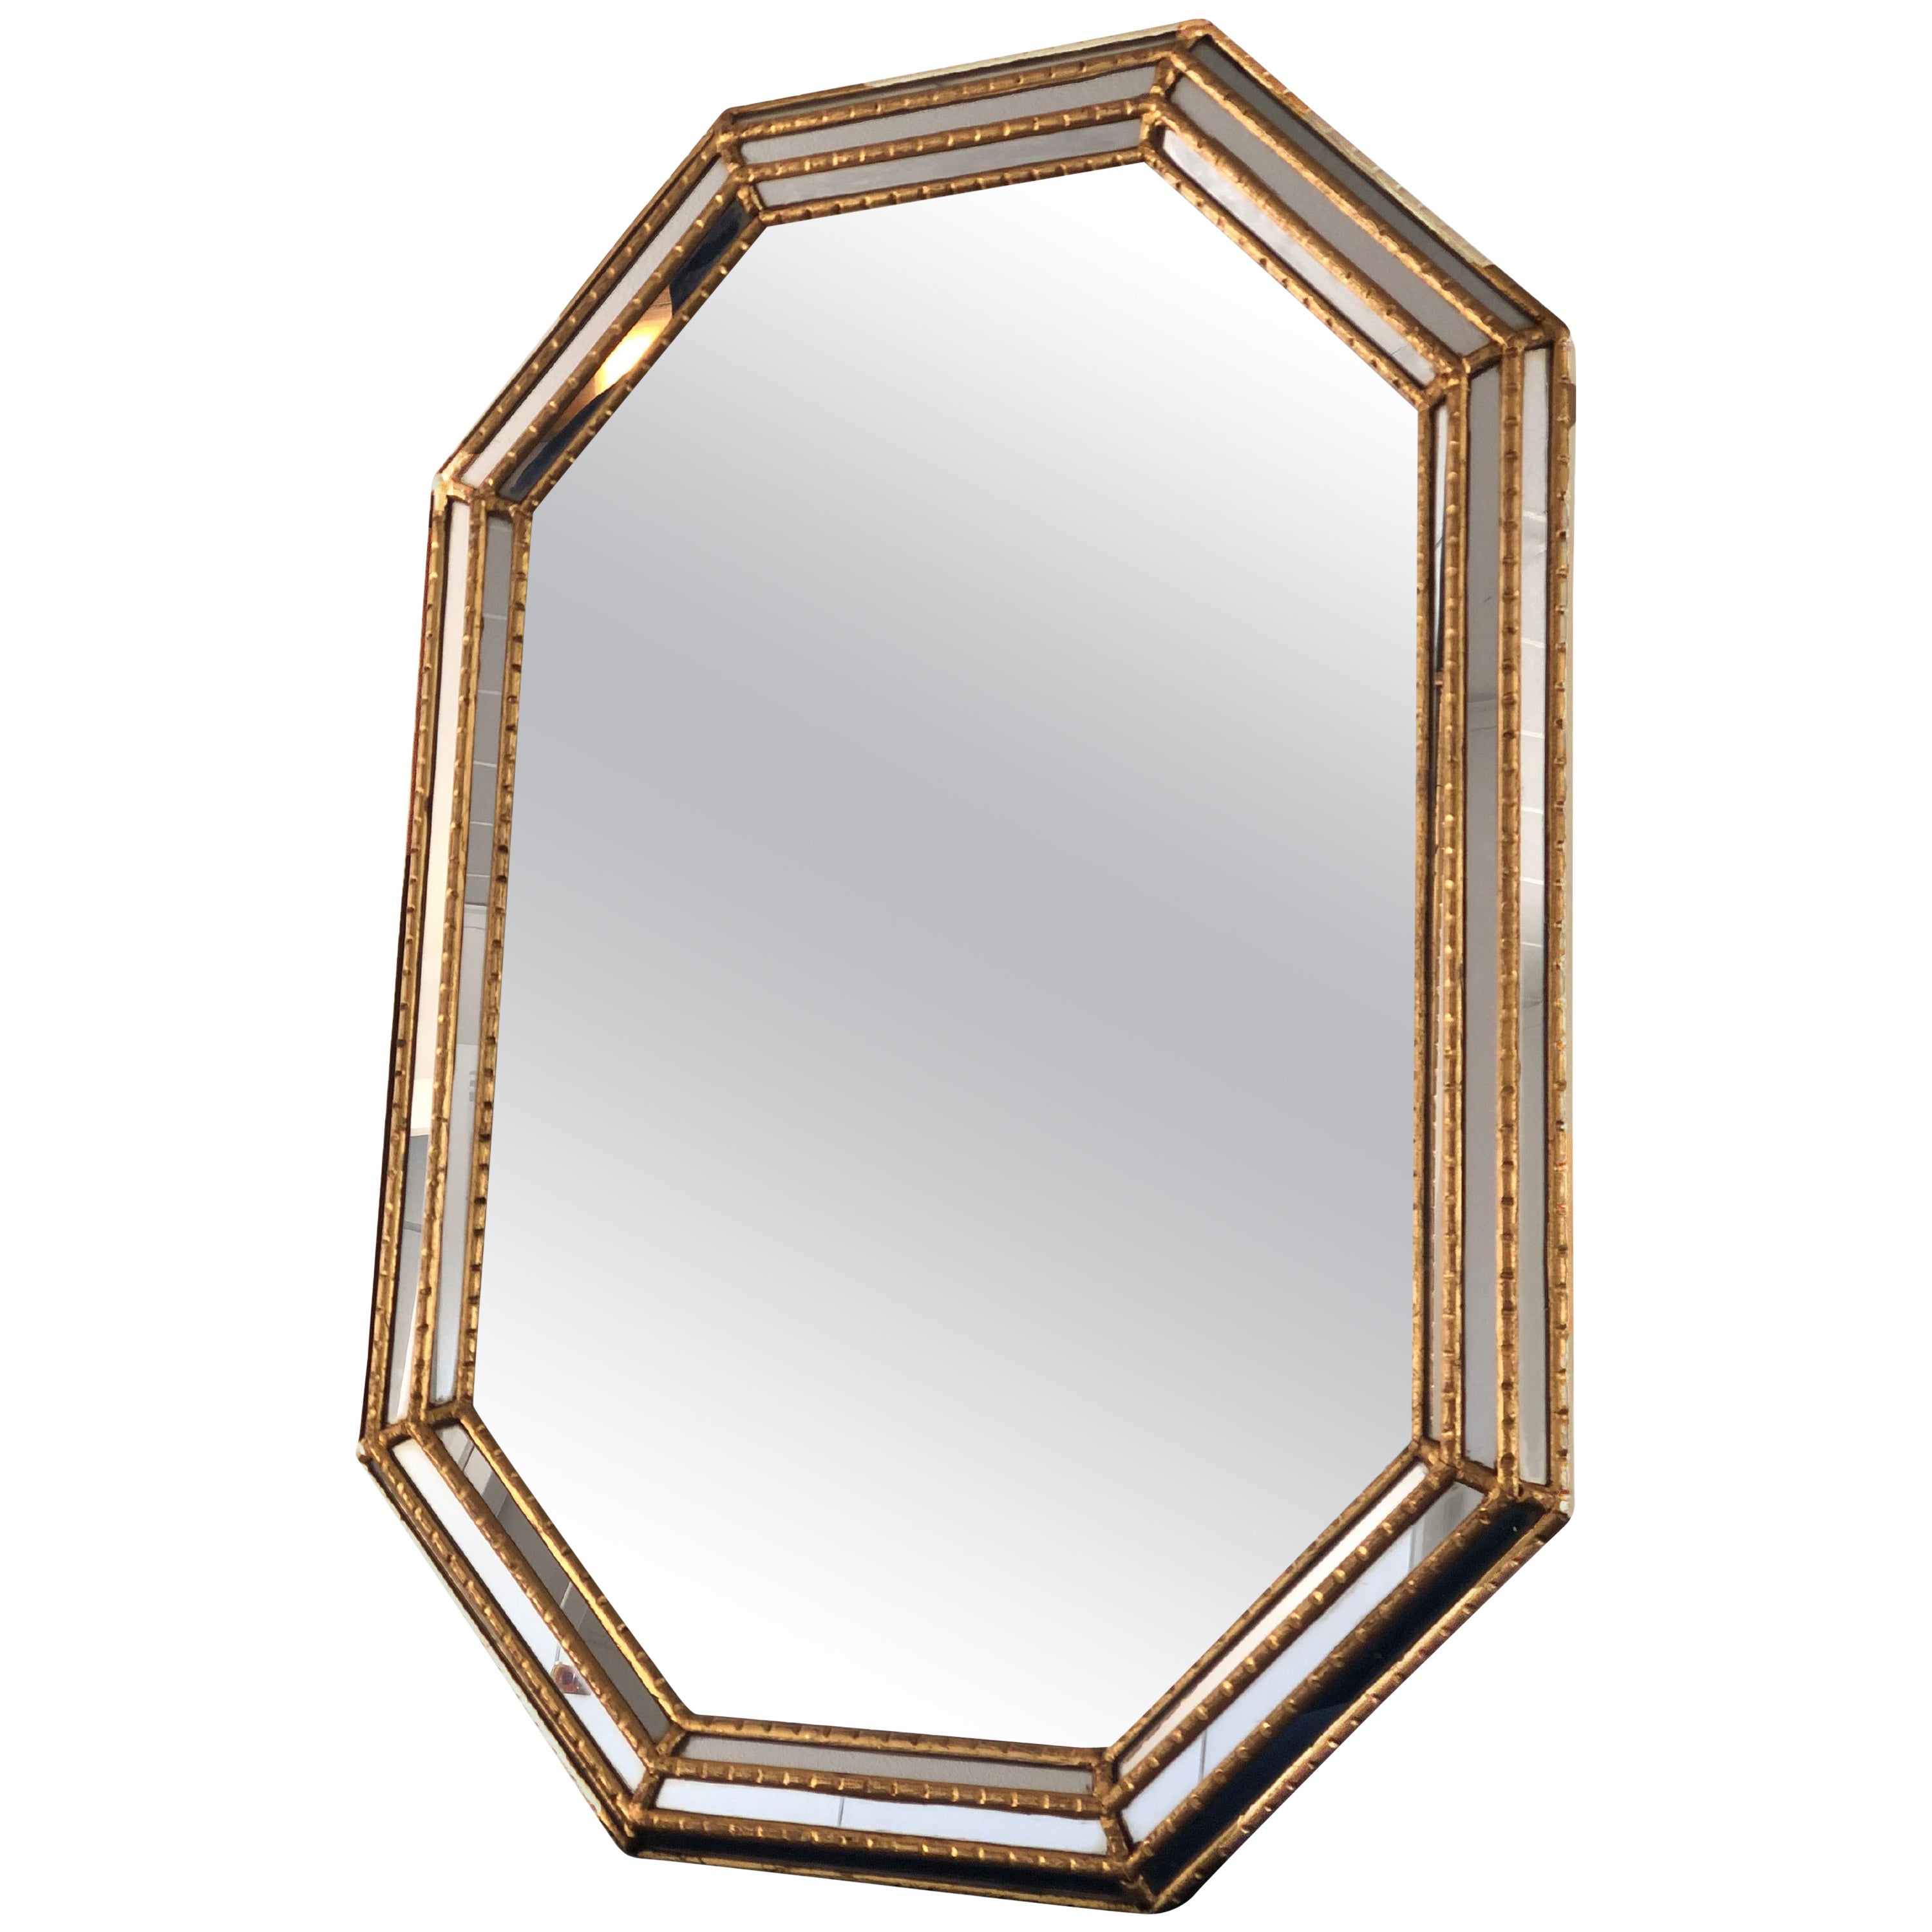 Beautiful Italian LaBarge mirror with a faux bamboo wooden frame in gold. The hand-carved octagonal frame has extra mirrors along the entire length and width.

Handmade mirror In good condition. Italy, 1970

Object: Mirror
Designer: LaBarge
Style: